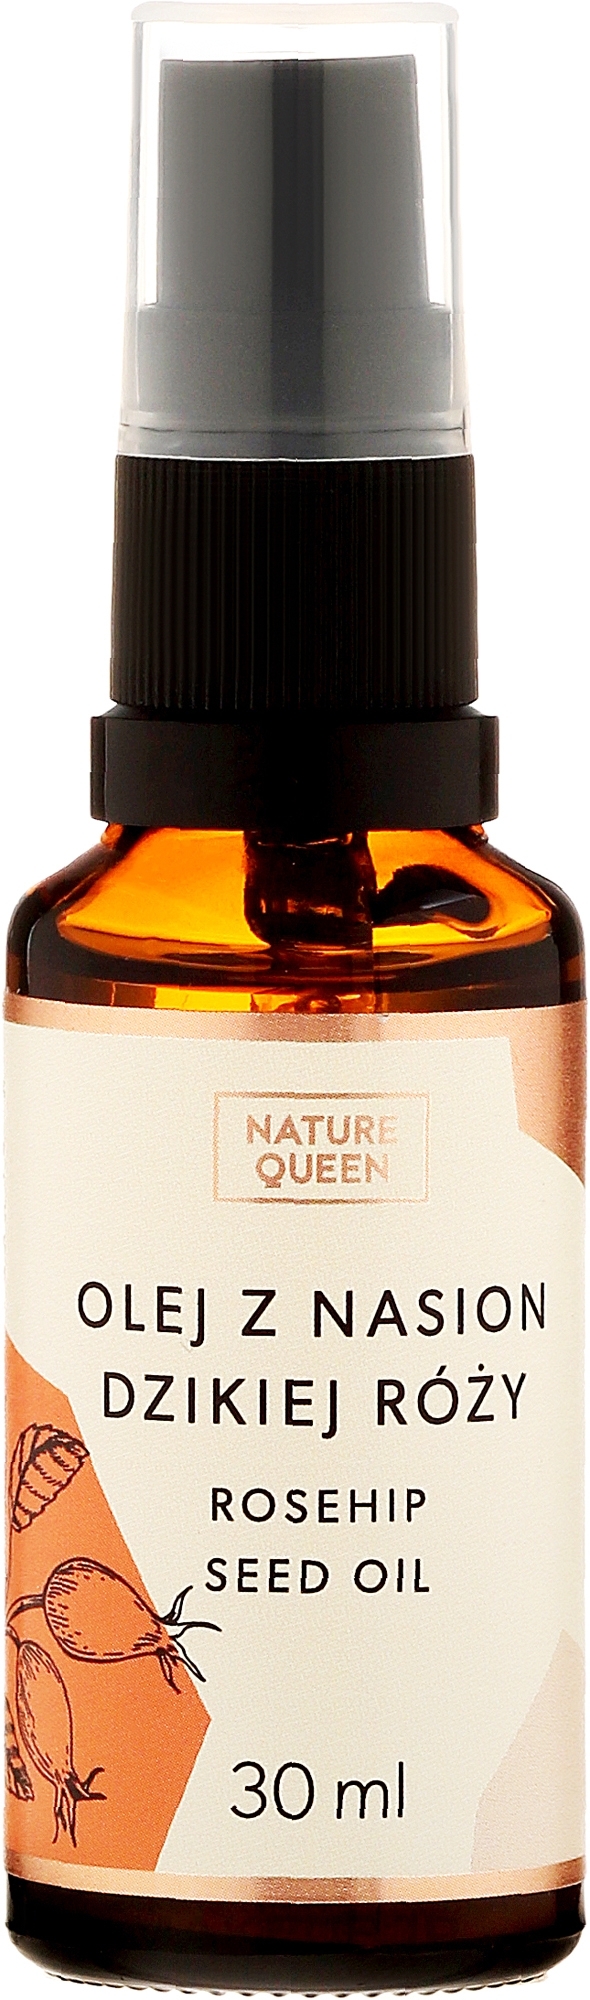 Rosehip Seed Oil - Nature Queen Rosehip Seed Oil — photo 30 ml